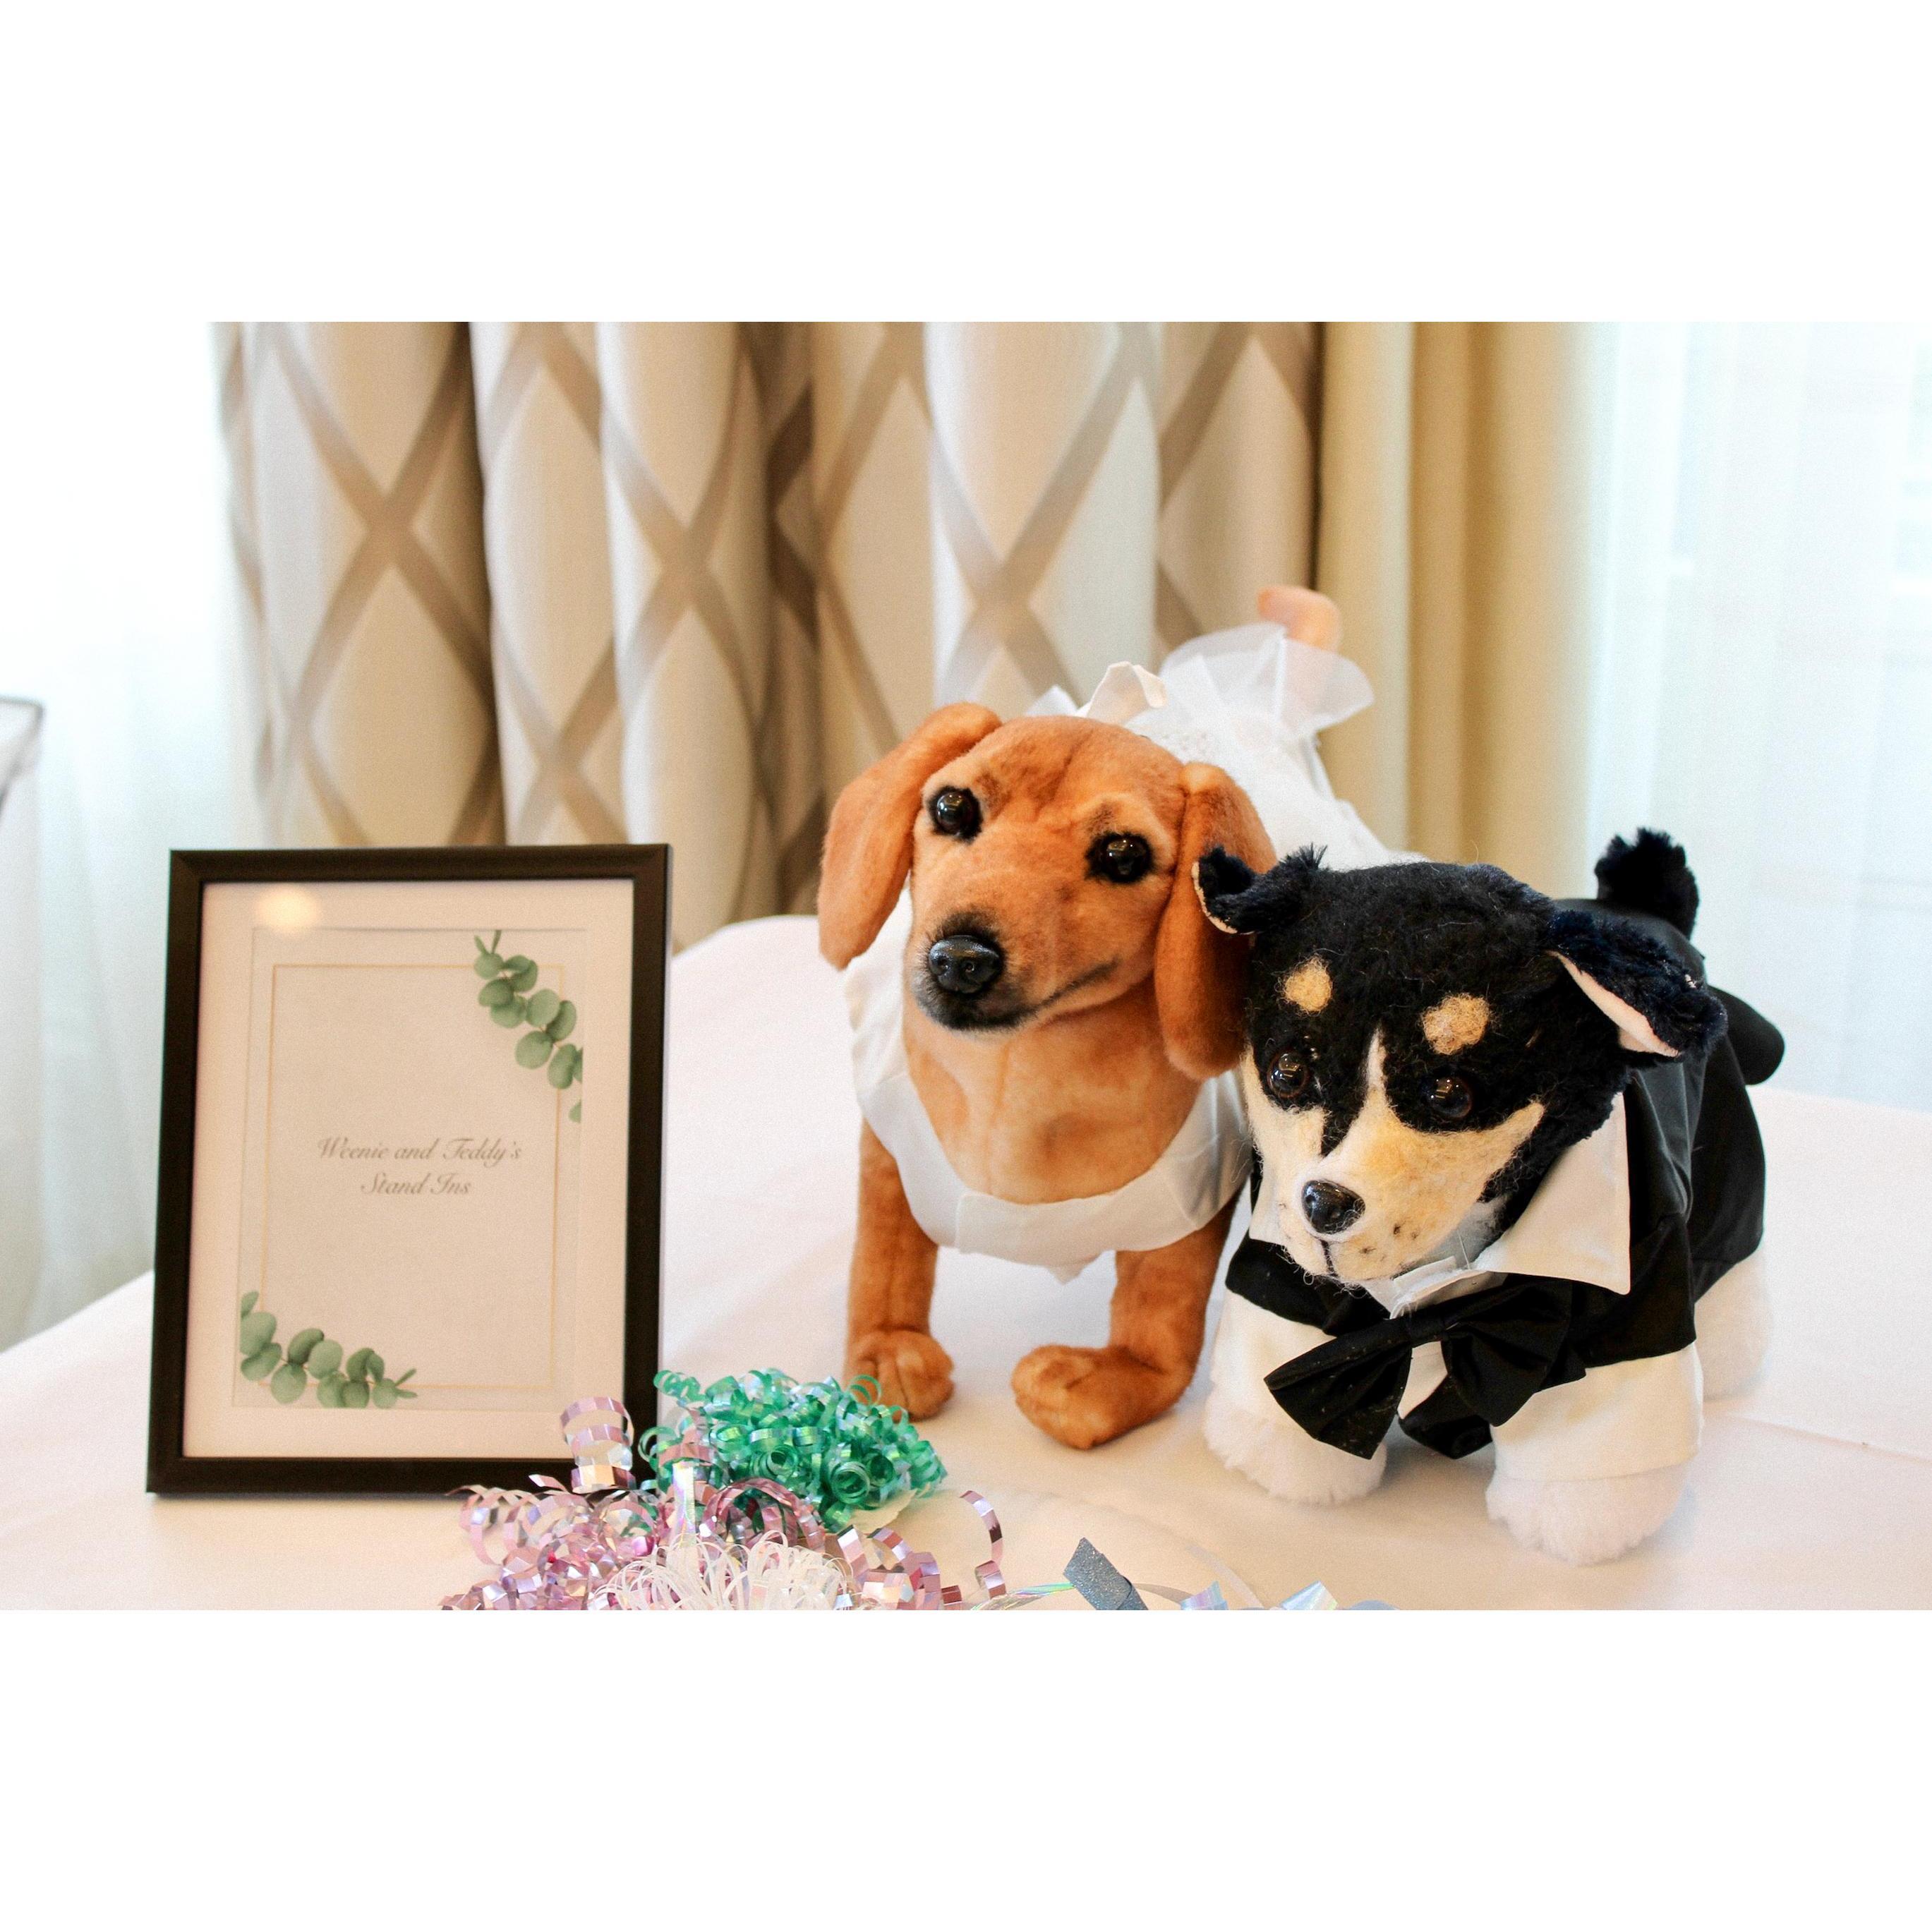 Two very important family members: Cleo & Teddy (in their own wedding attire)